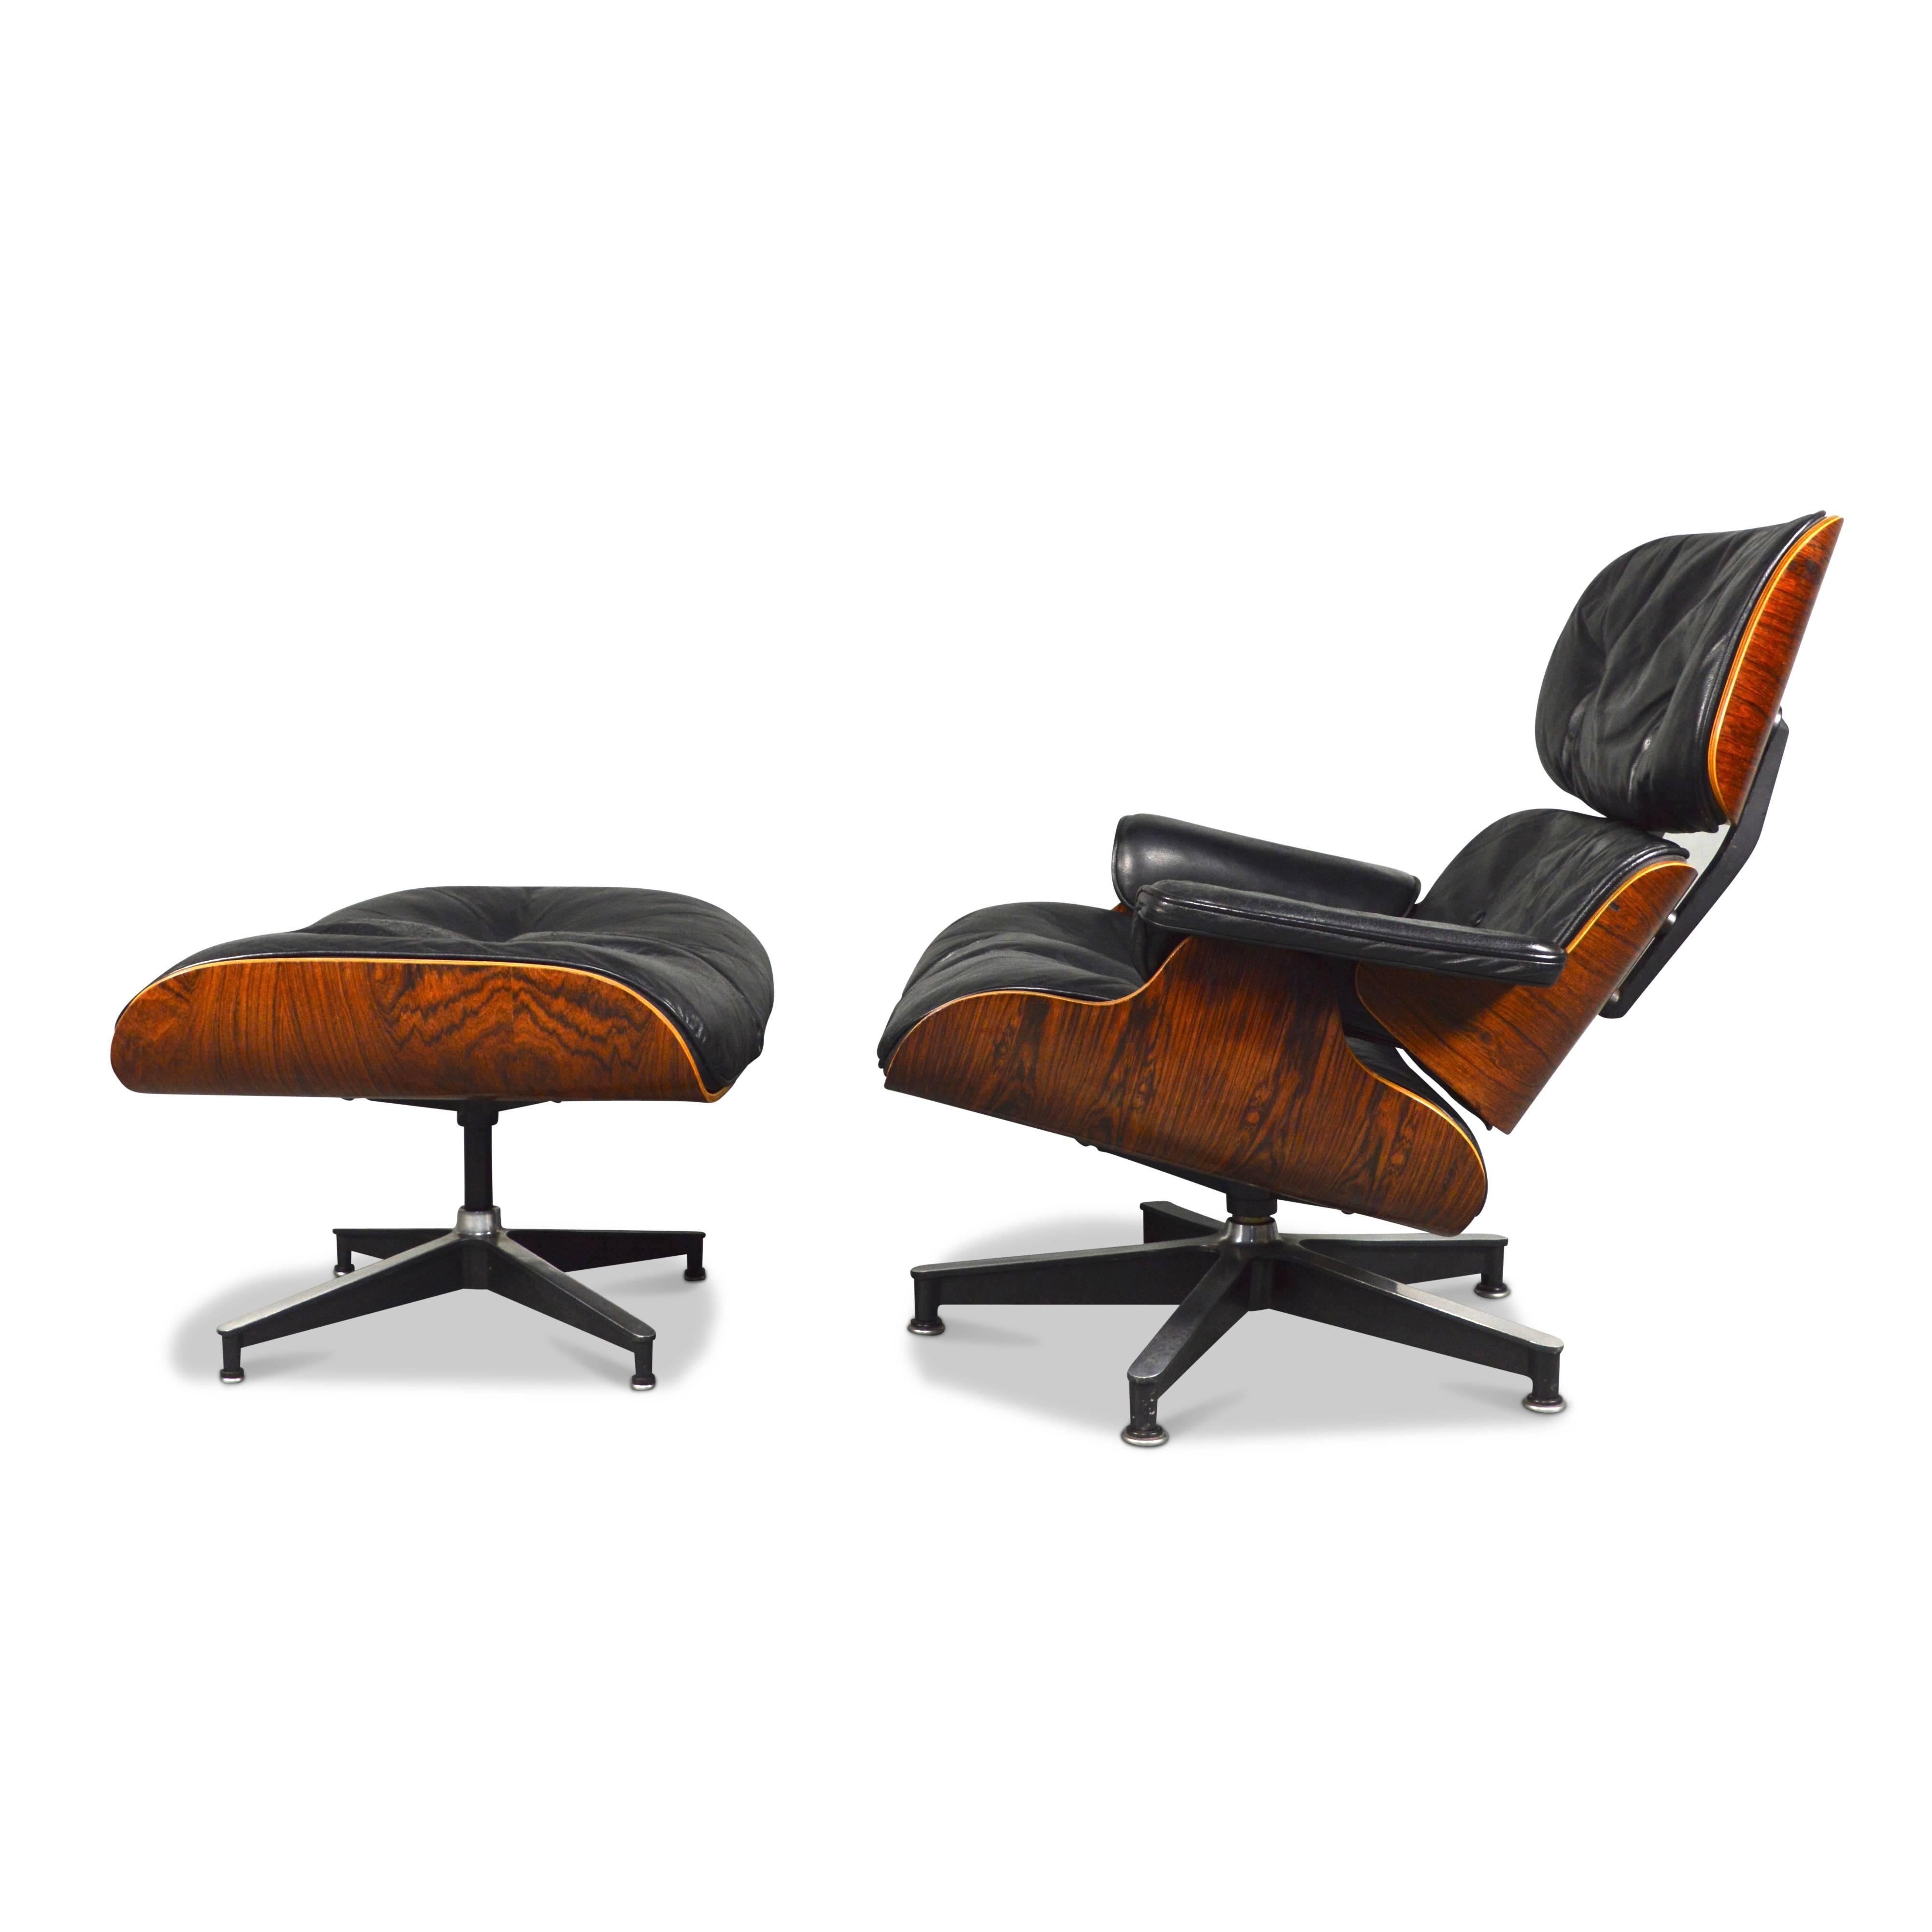 Second generation Charles and Ray Eames lounge chair with ottoman by Herman Miller.
Early 1960s production.
It has the round white metal brand plate on the bottom.
The chair is down filled.
The rosewood has a beautiful wood grain, a very warm color